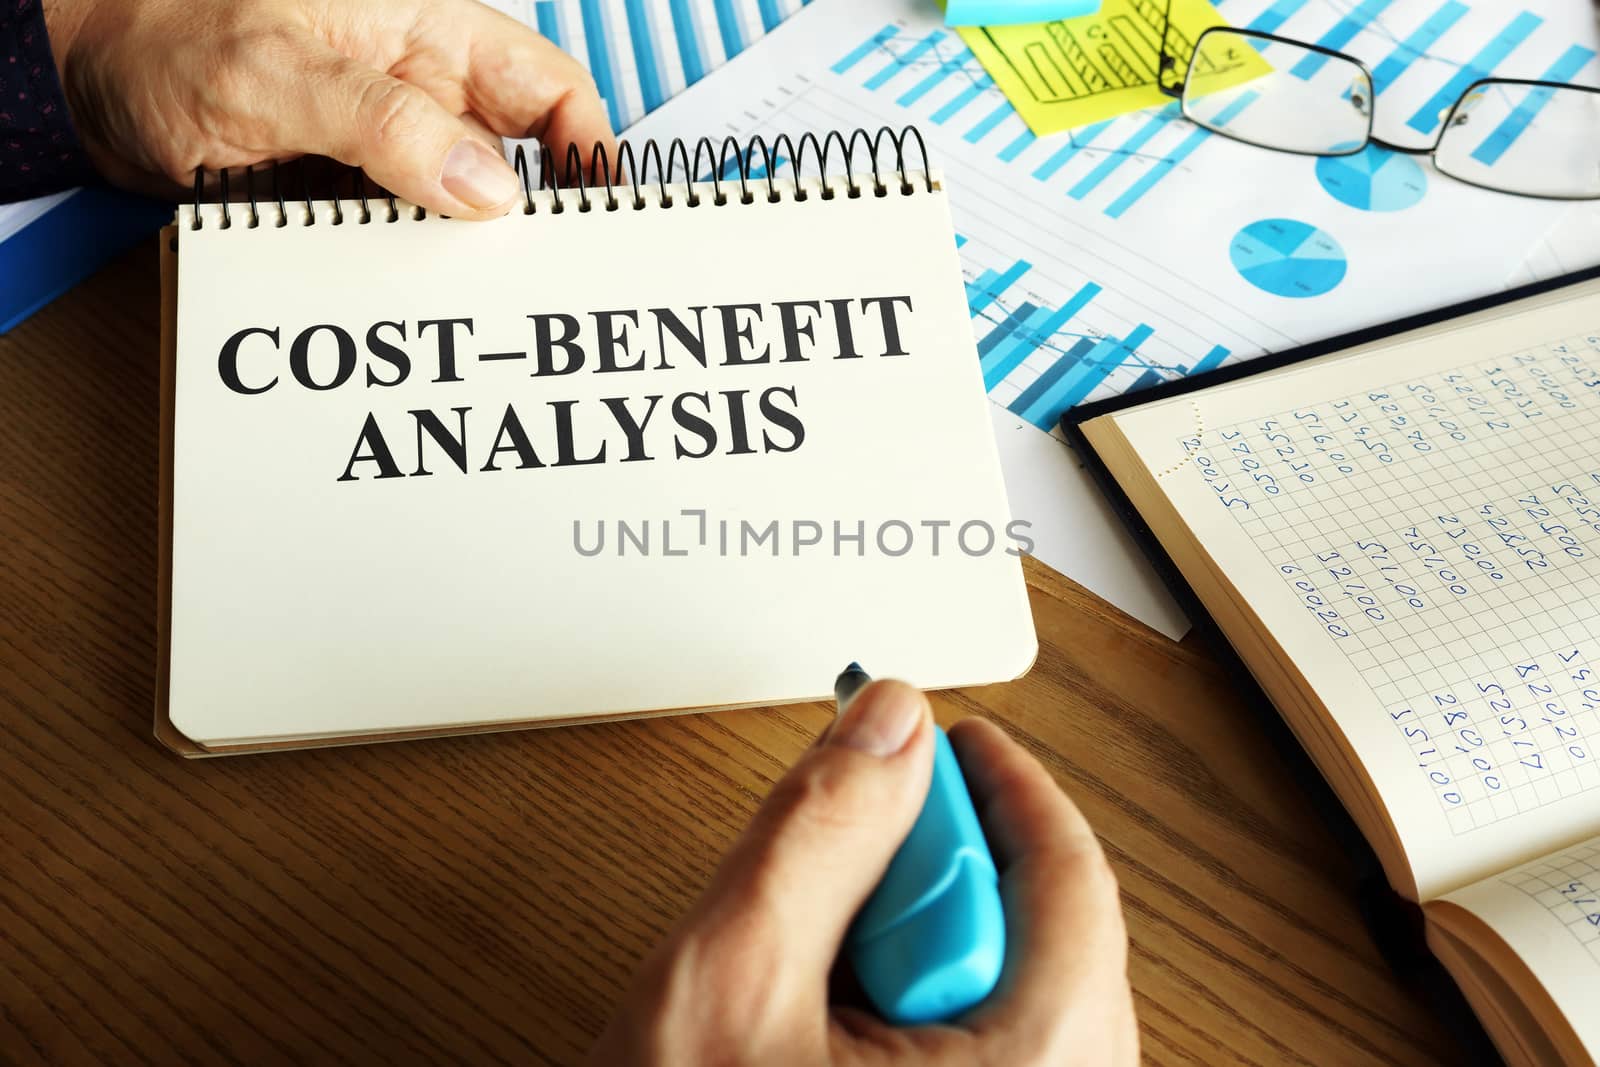 Cost-benefit analysis CBA or BCA on the table.